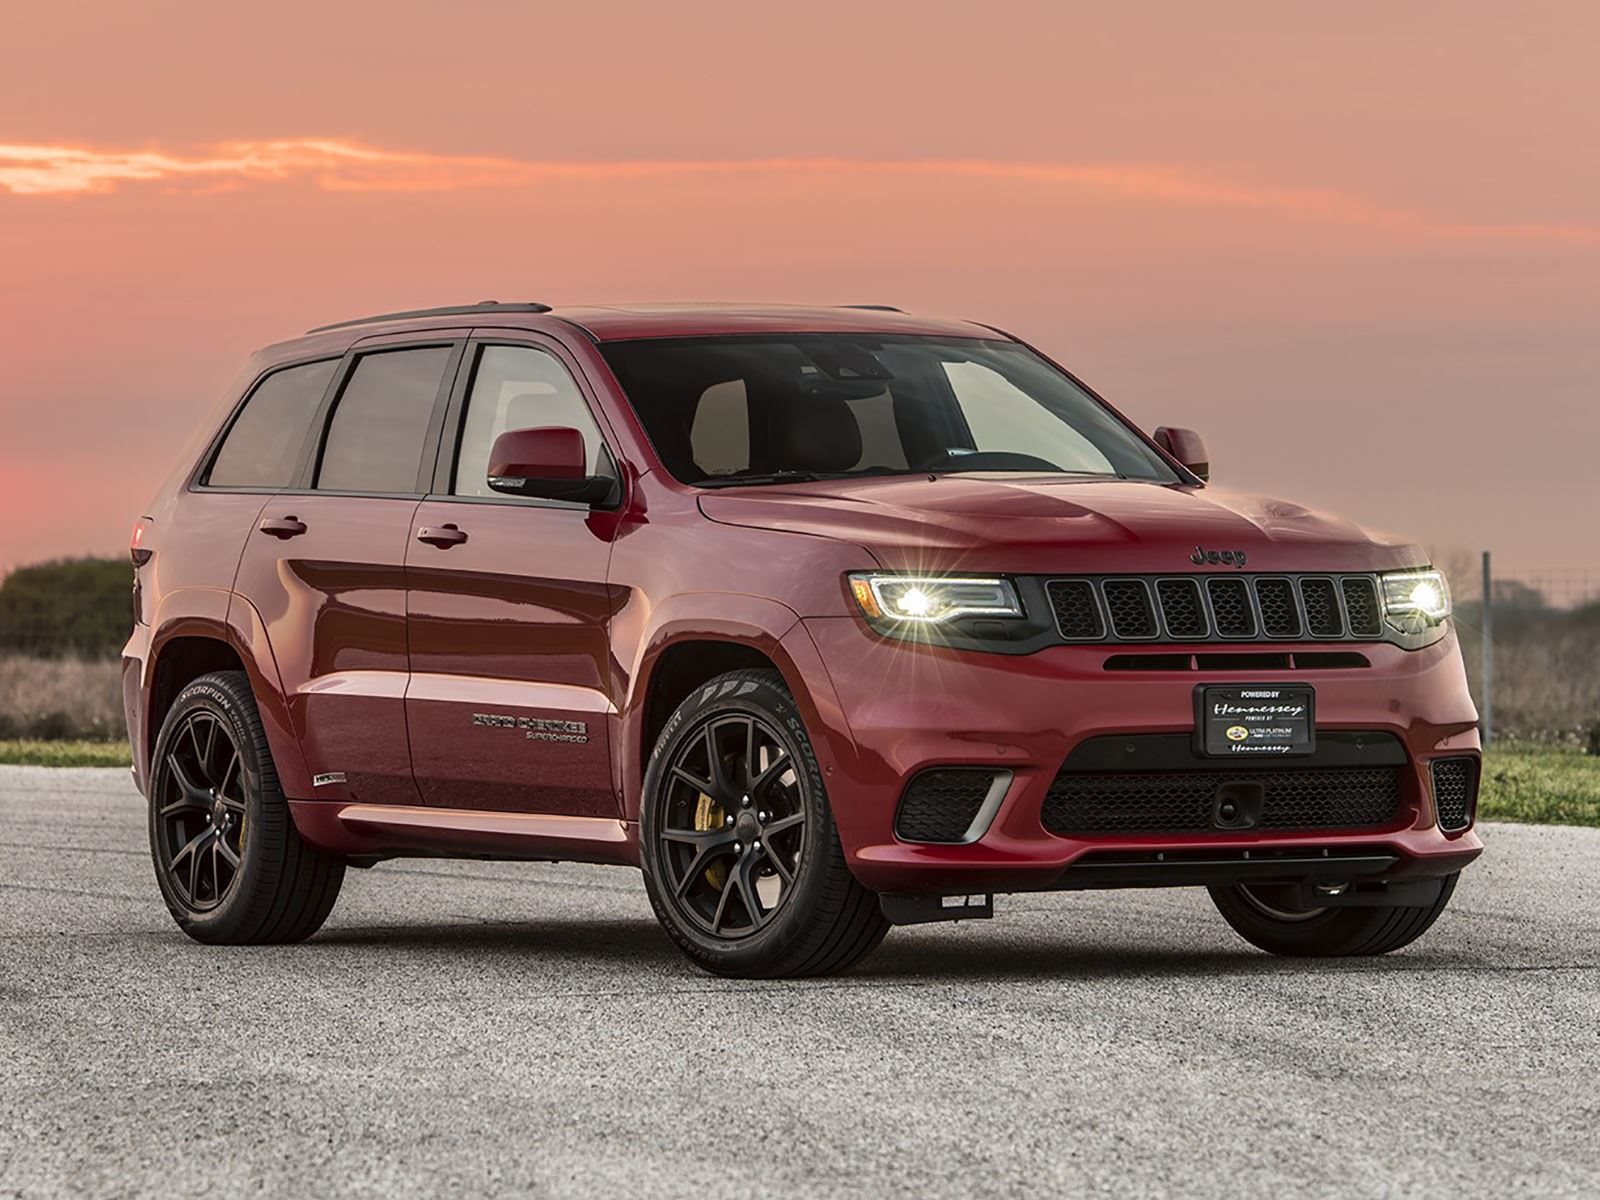 850-HP Jeep Grand Cherokee Trackhawk Is A New Hennessey Beast.